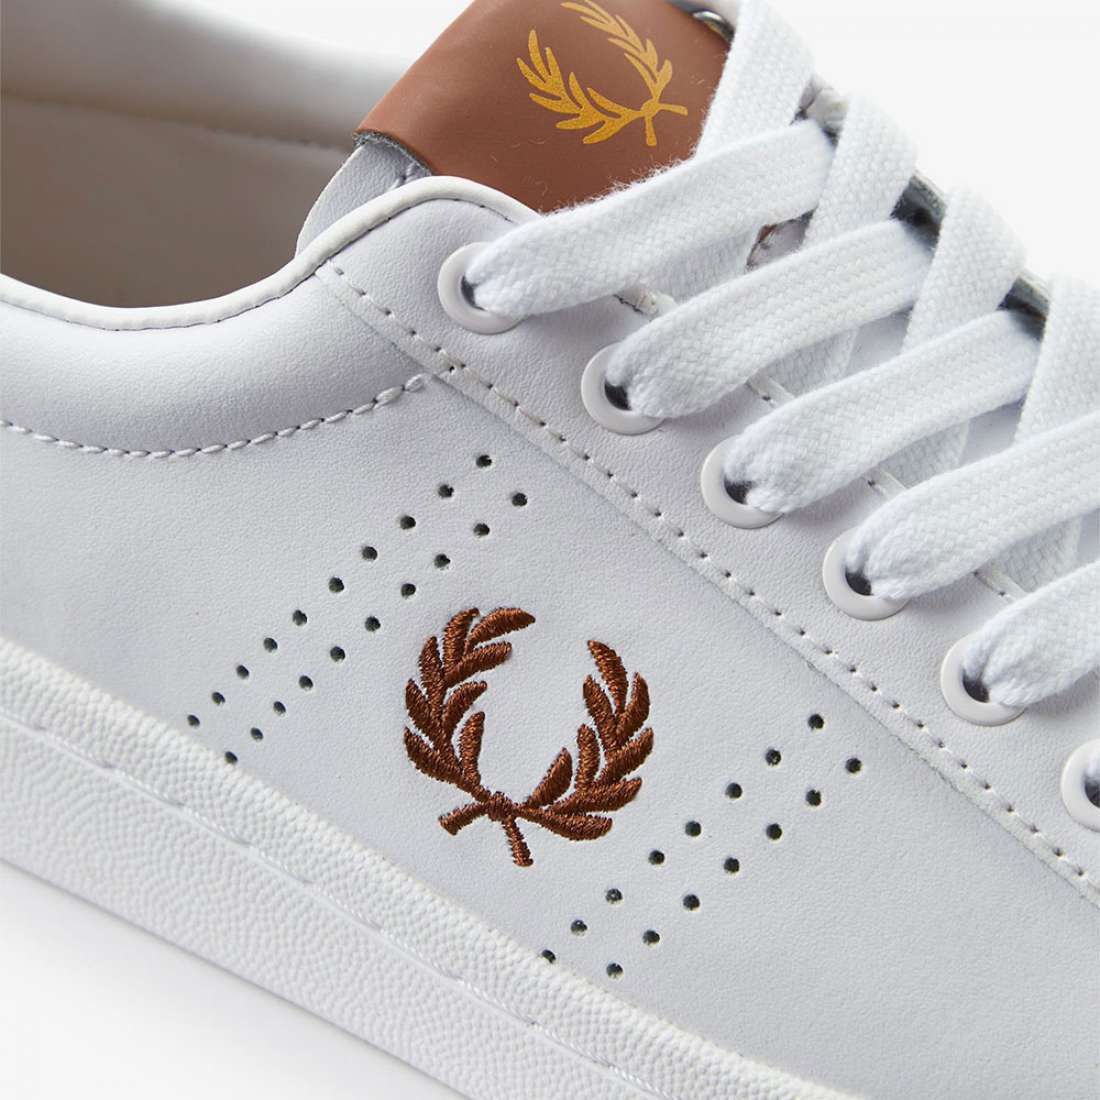 FRED PERRY B721 WHITE